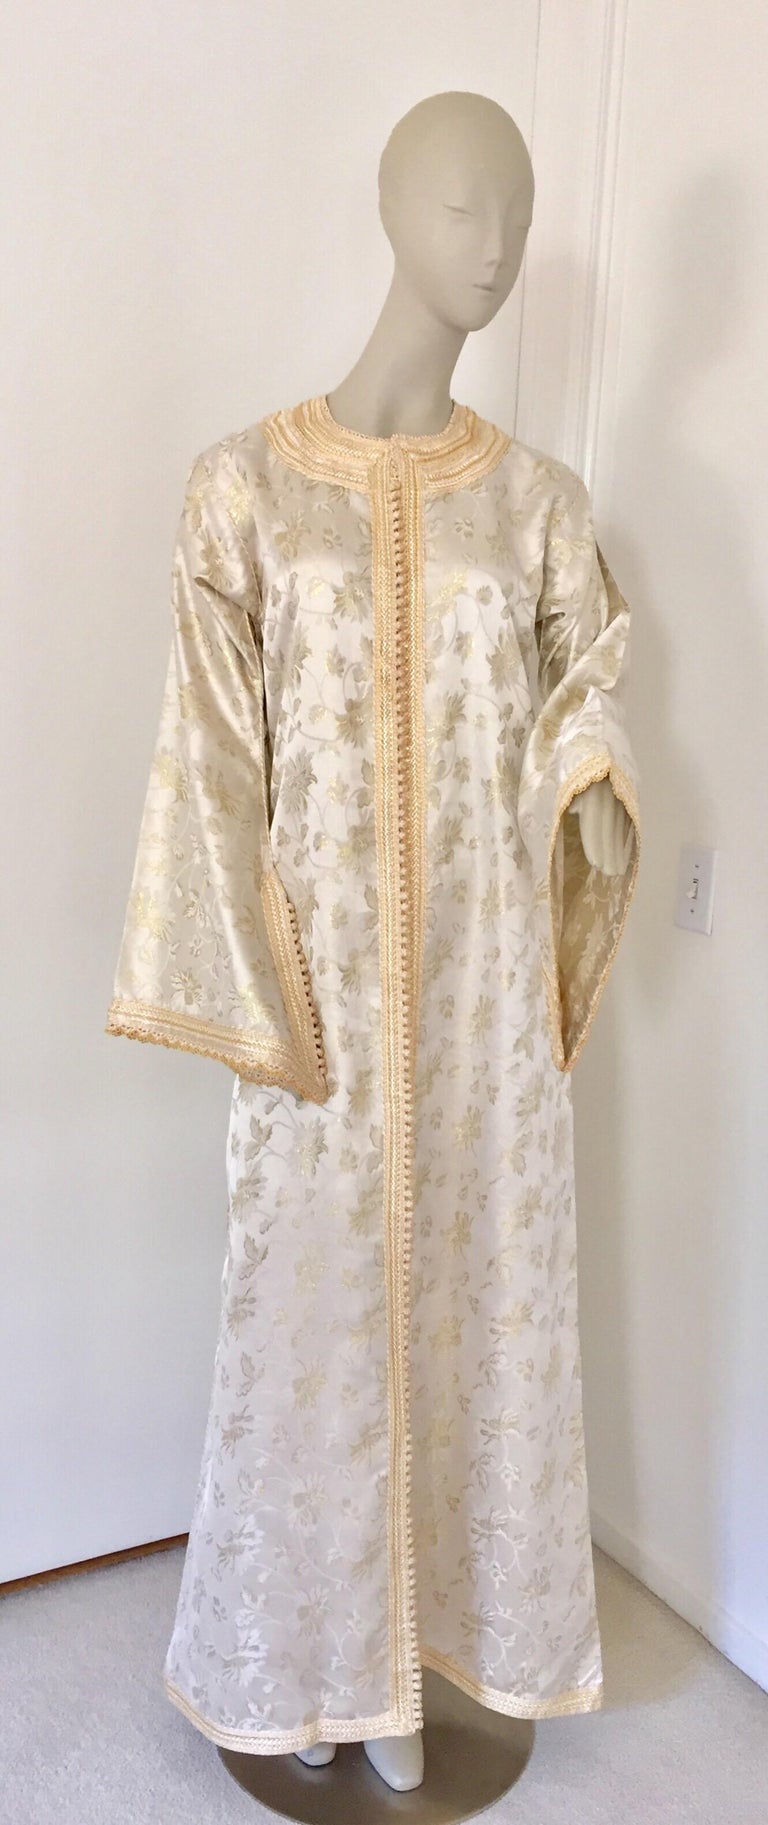 Elegant Moroccan Caftan White and Gold Metallic Floral Brocade In Good Condition For Sale In North Hollywood, CA